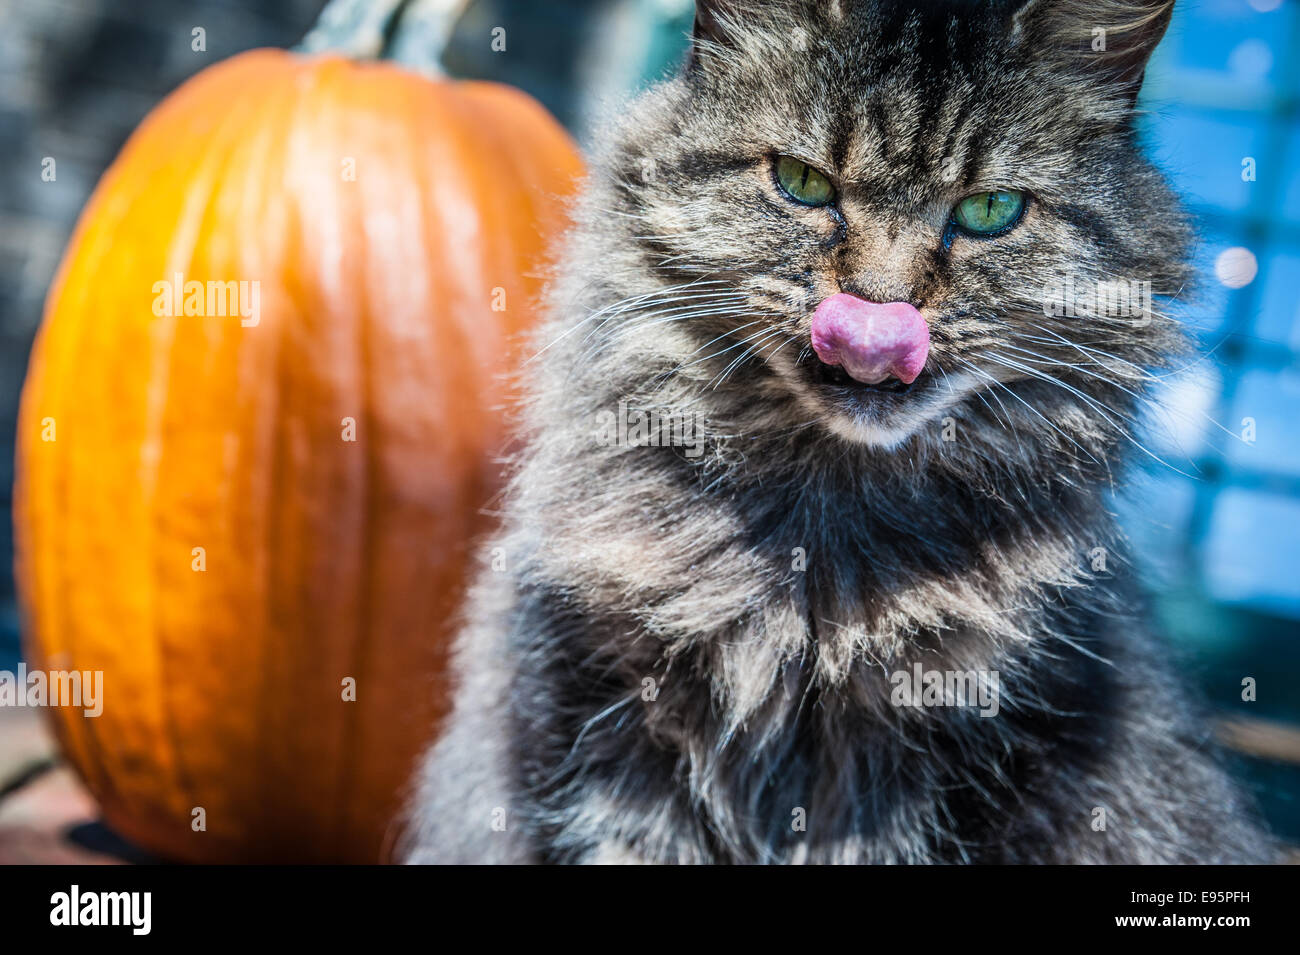 Green-eyed cat licks her lips and stares intently from her perch in front of a sunlit pumpkin. Stock Photo